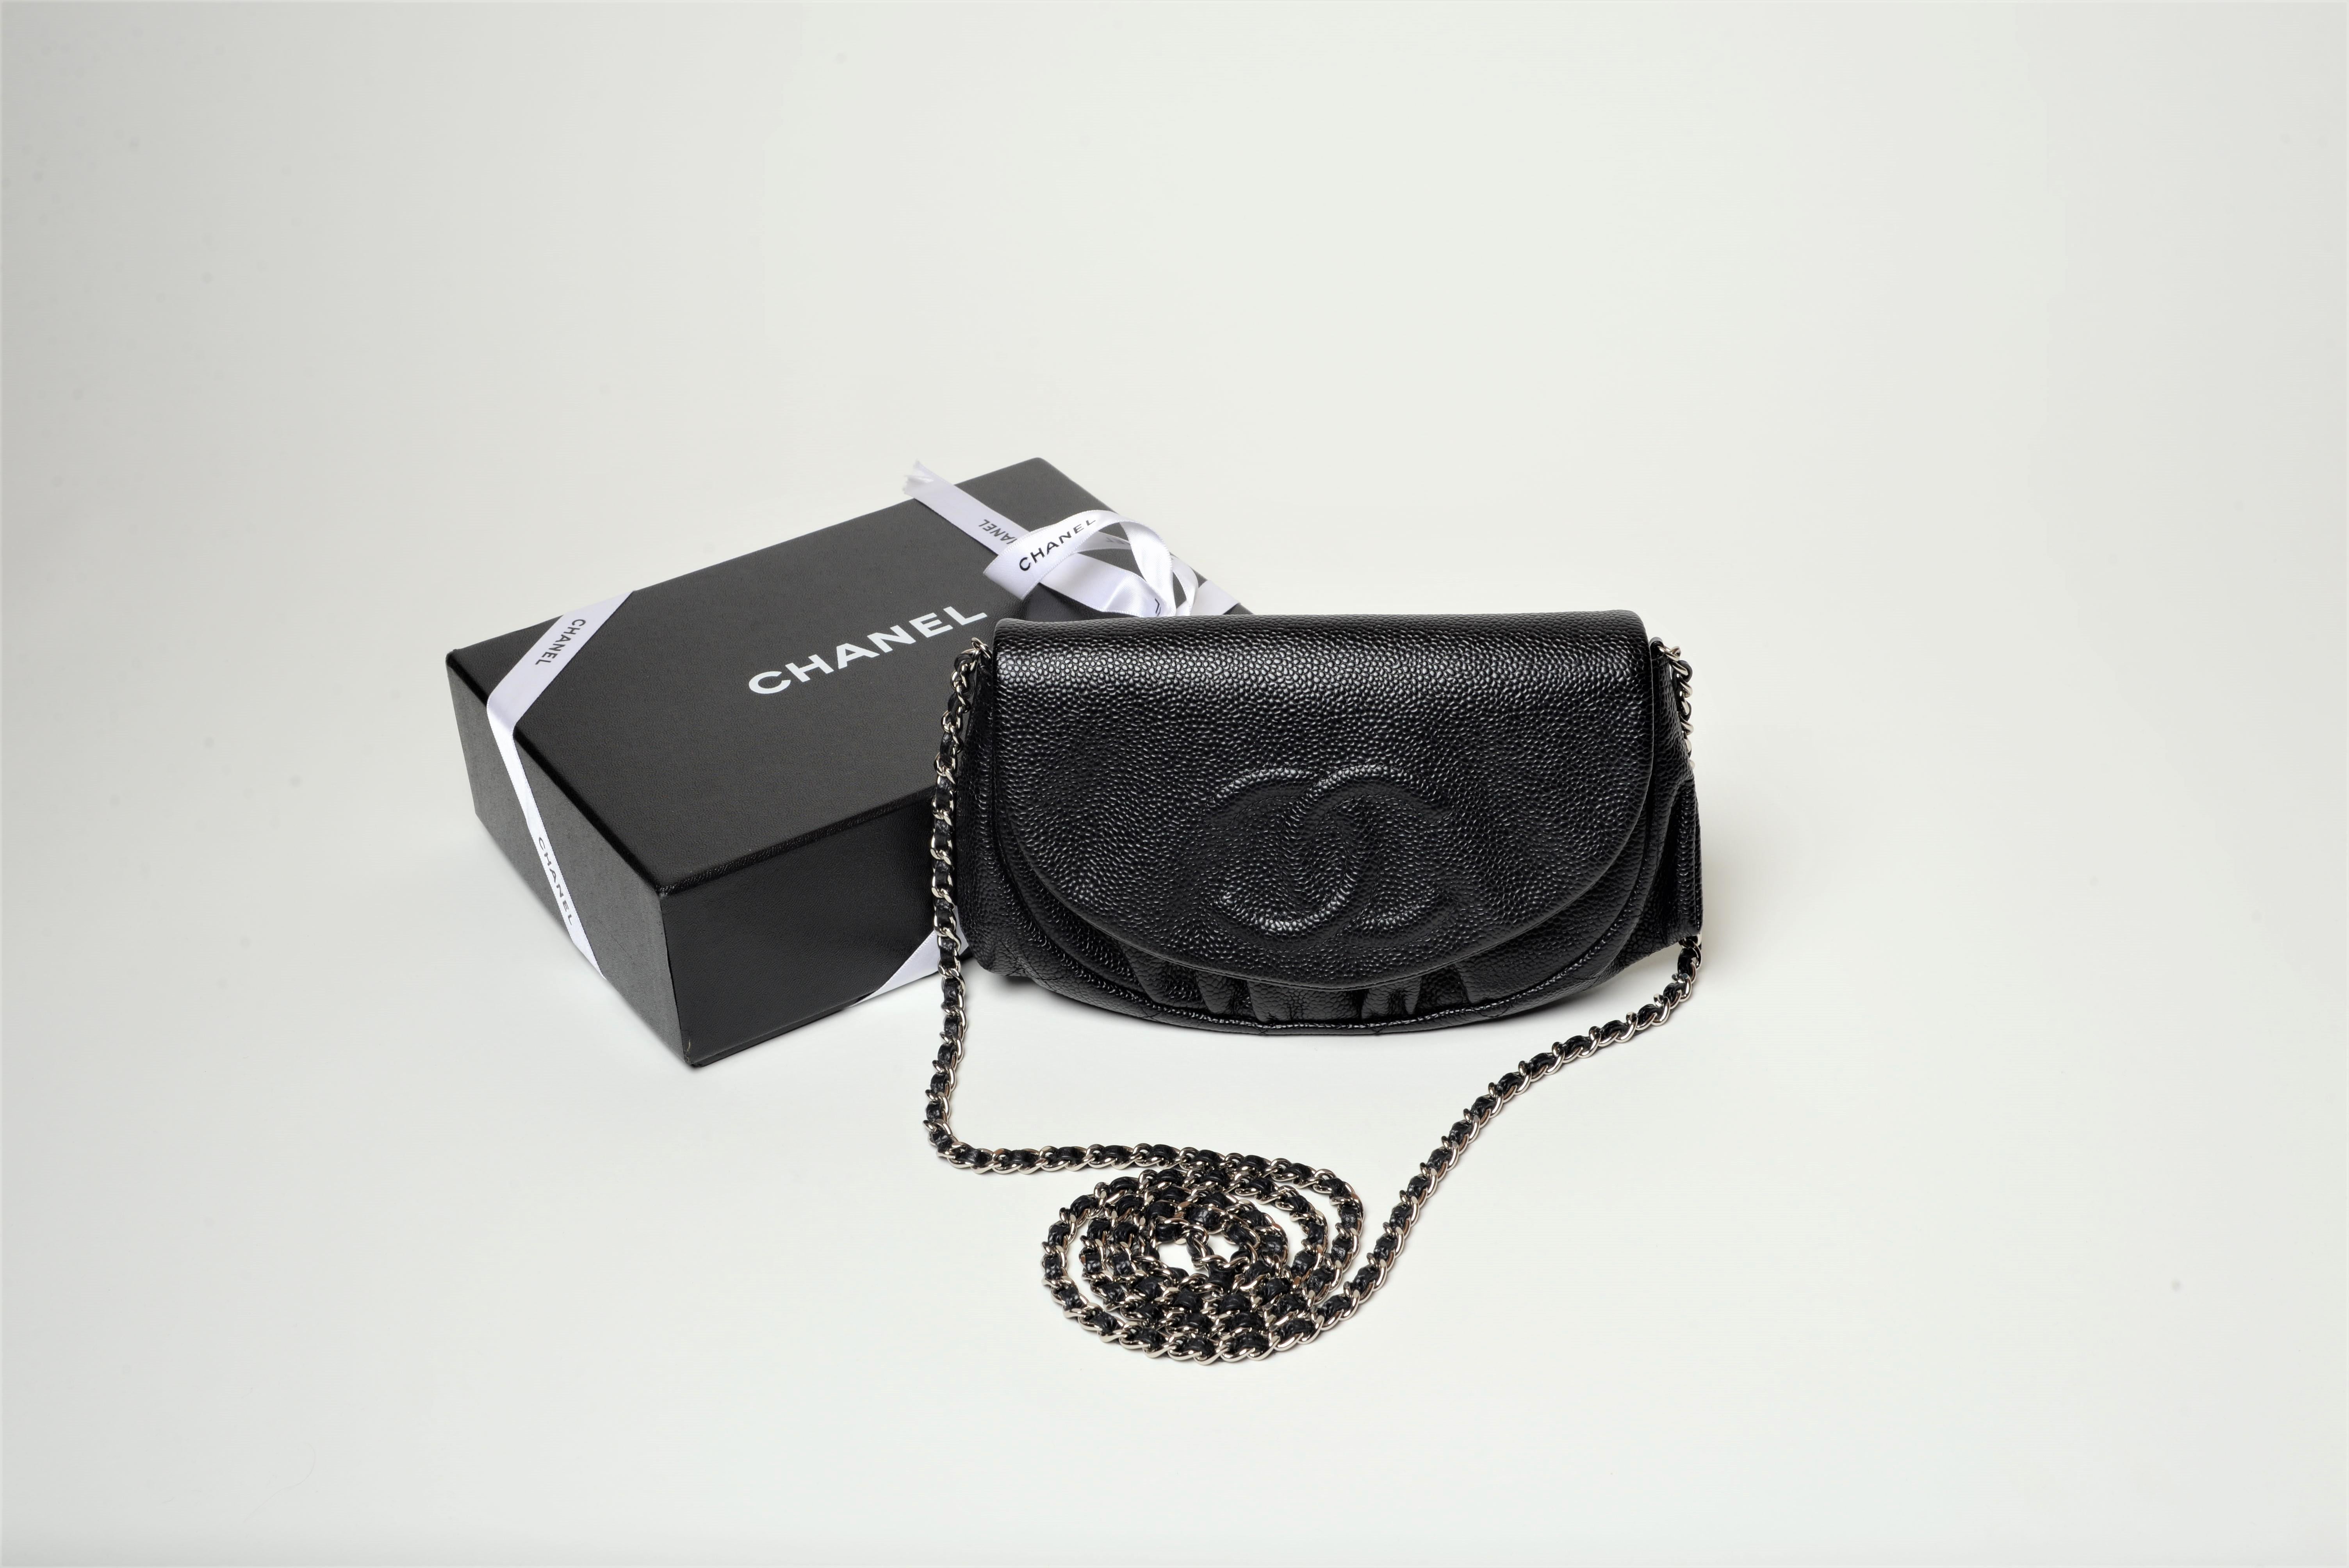 From the collection of Savineti we offer this Chanel Halfmoon WOC:
-	Brand: Chanel
-	Model: Halfmoon WOC
-	Year: 2011
-	Code: 15814567
-	Condition: Very Good
-	Materials: Cavier Leather 
-	Extras: Chanel Box & Dustbag

We at SAVINETI sell rare and